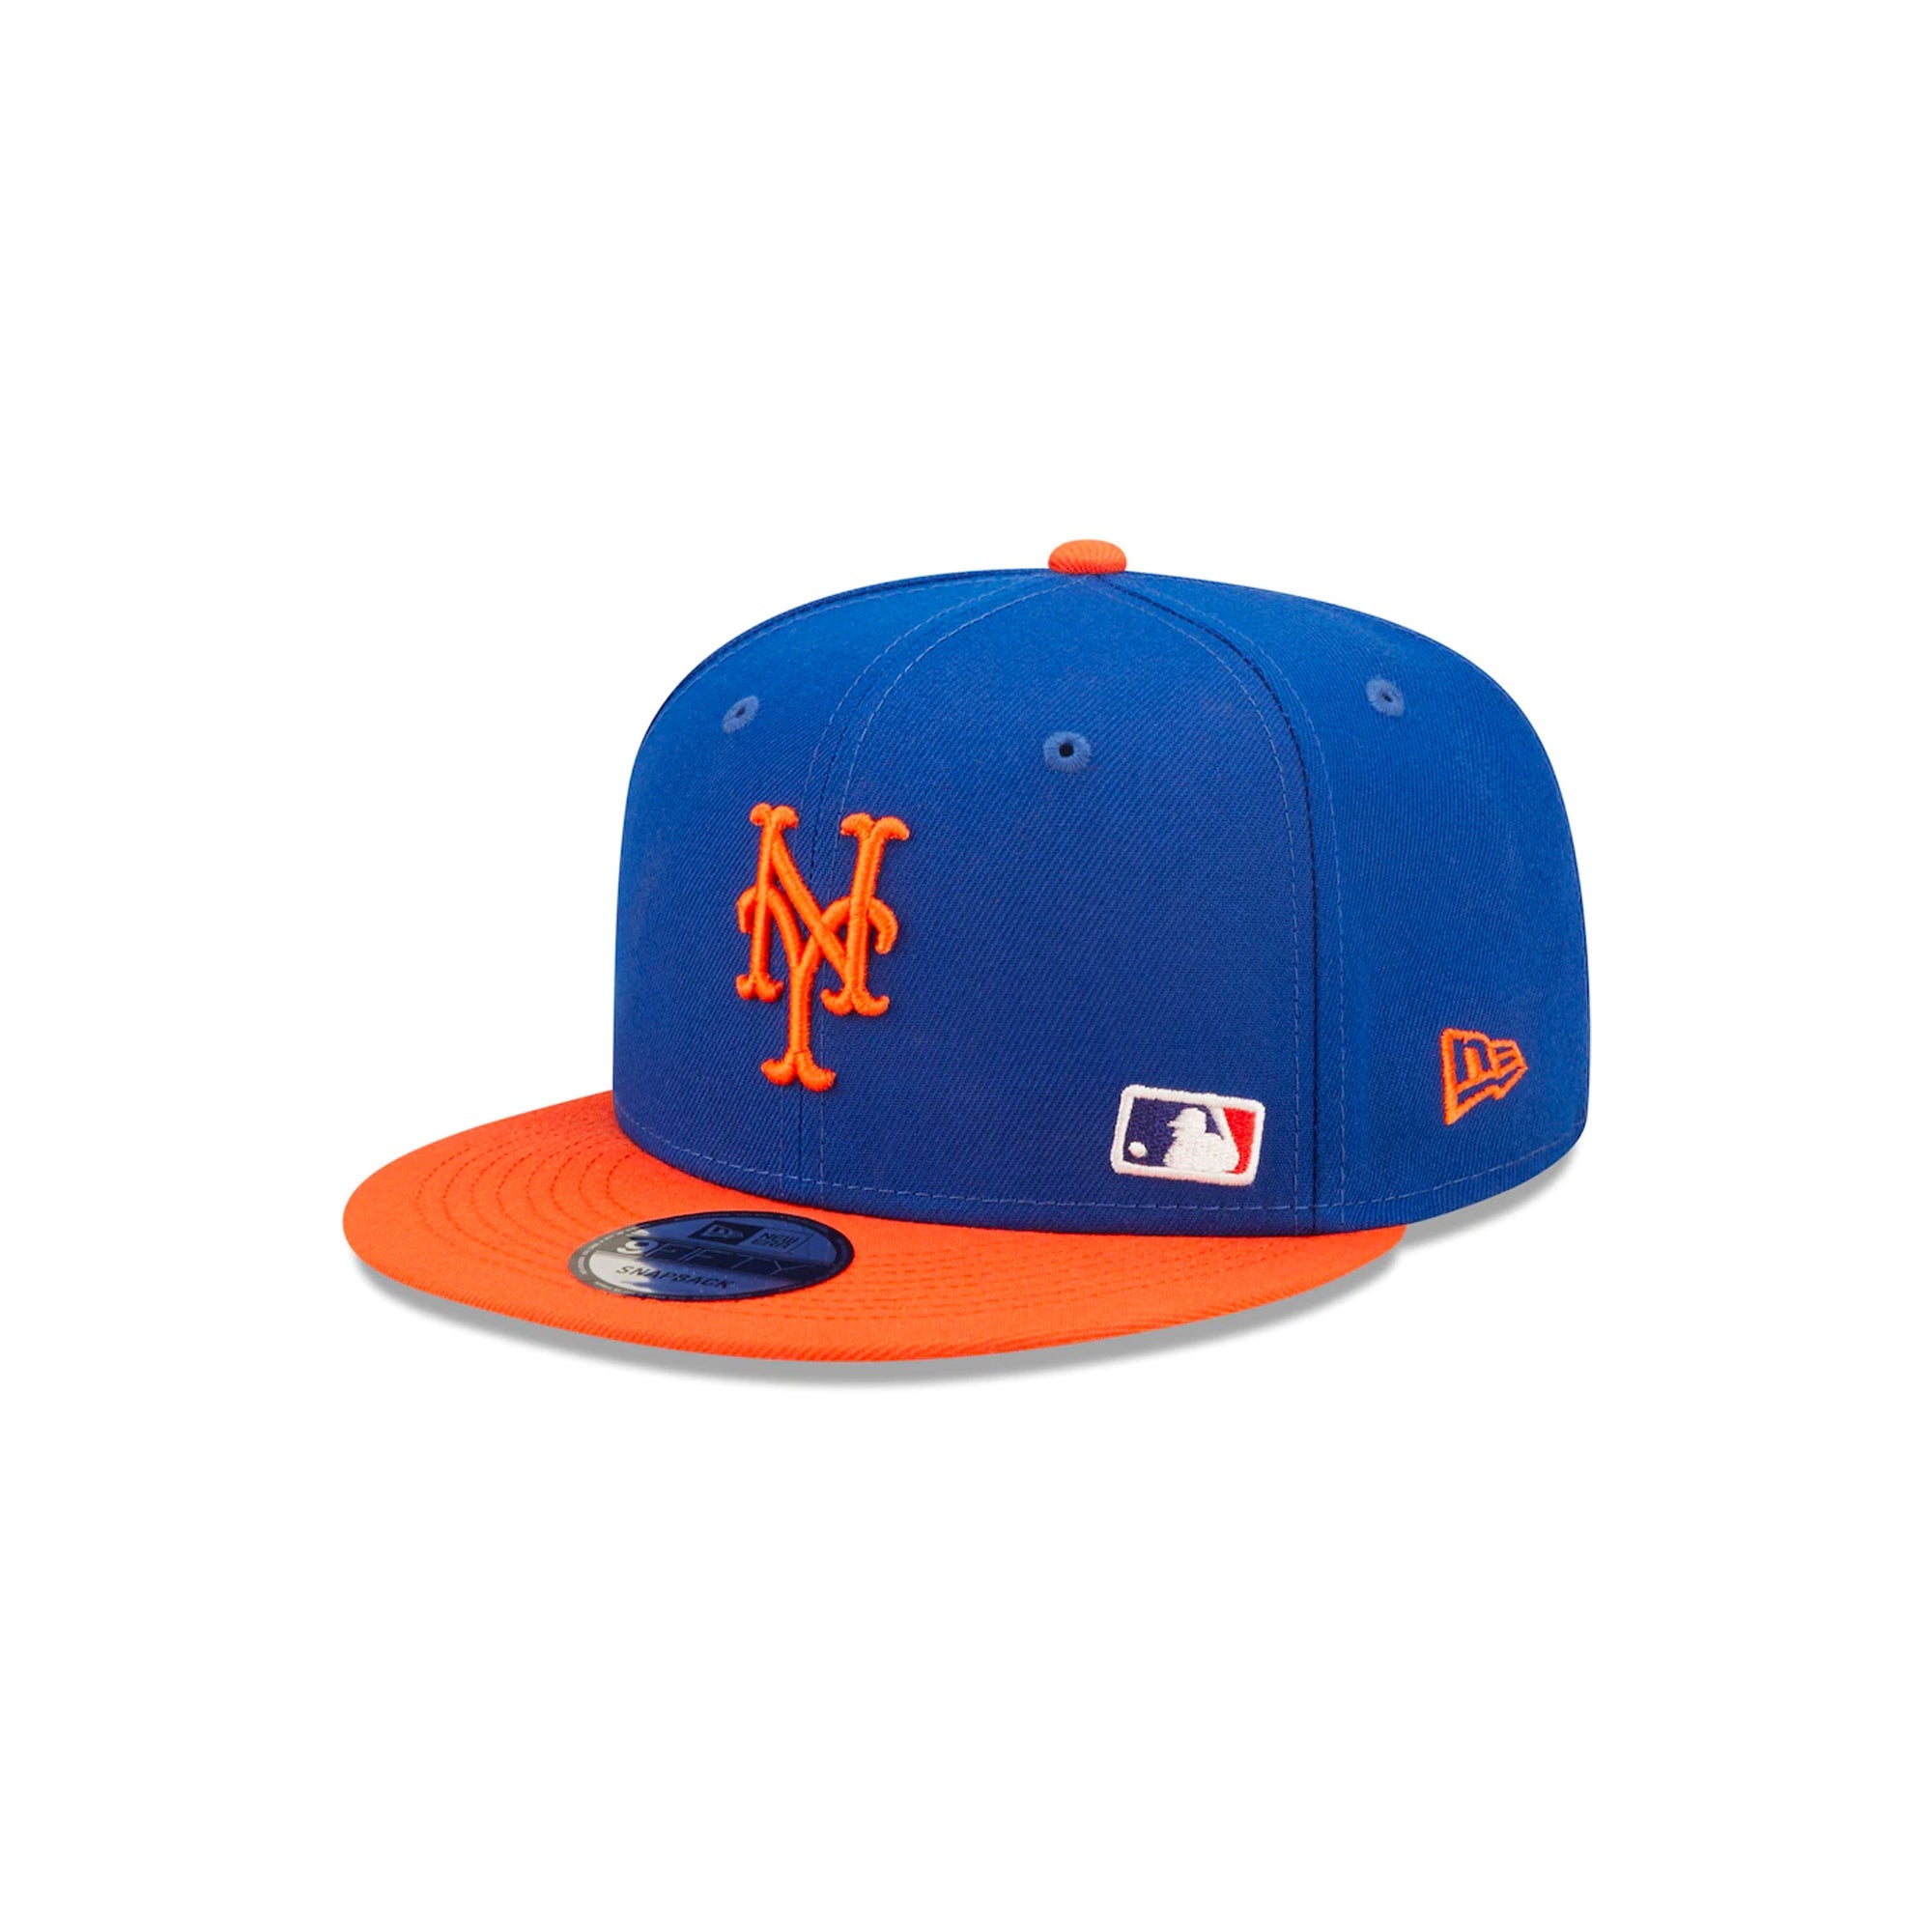 New Era Backletter Arch 9FIFTY New York Mets Snapback Hat